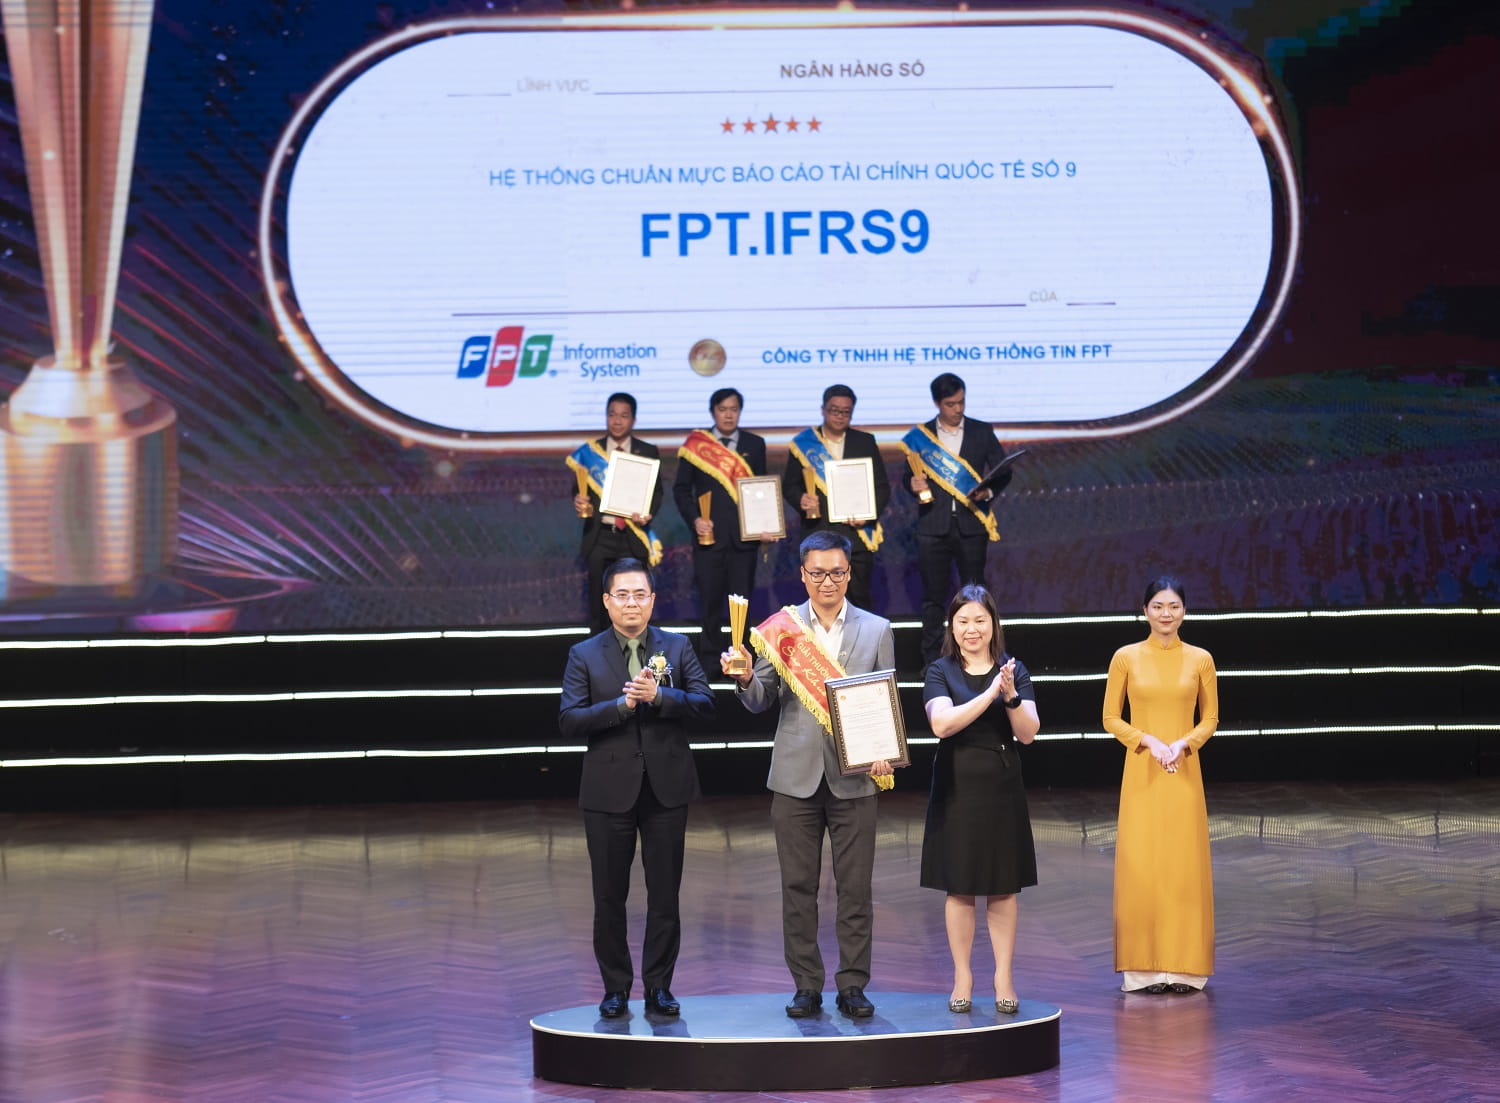 FPT.IFRS9 - an international financial reporting standards system software - achieved 5-star certification.